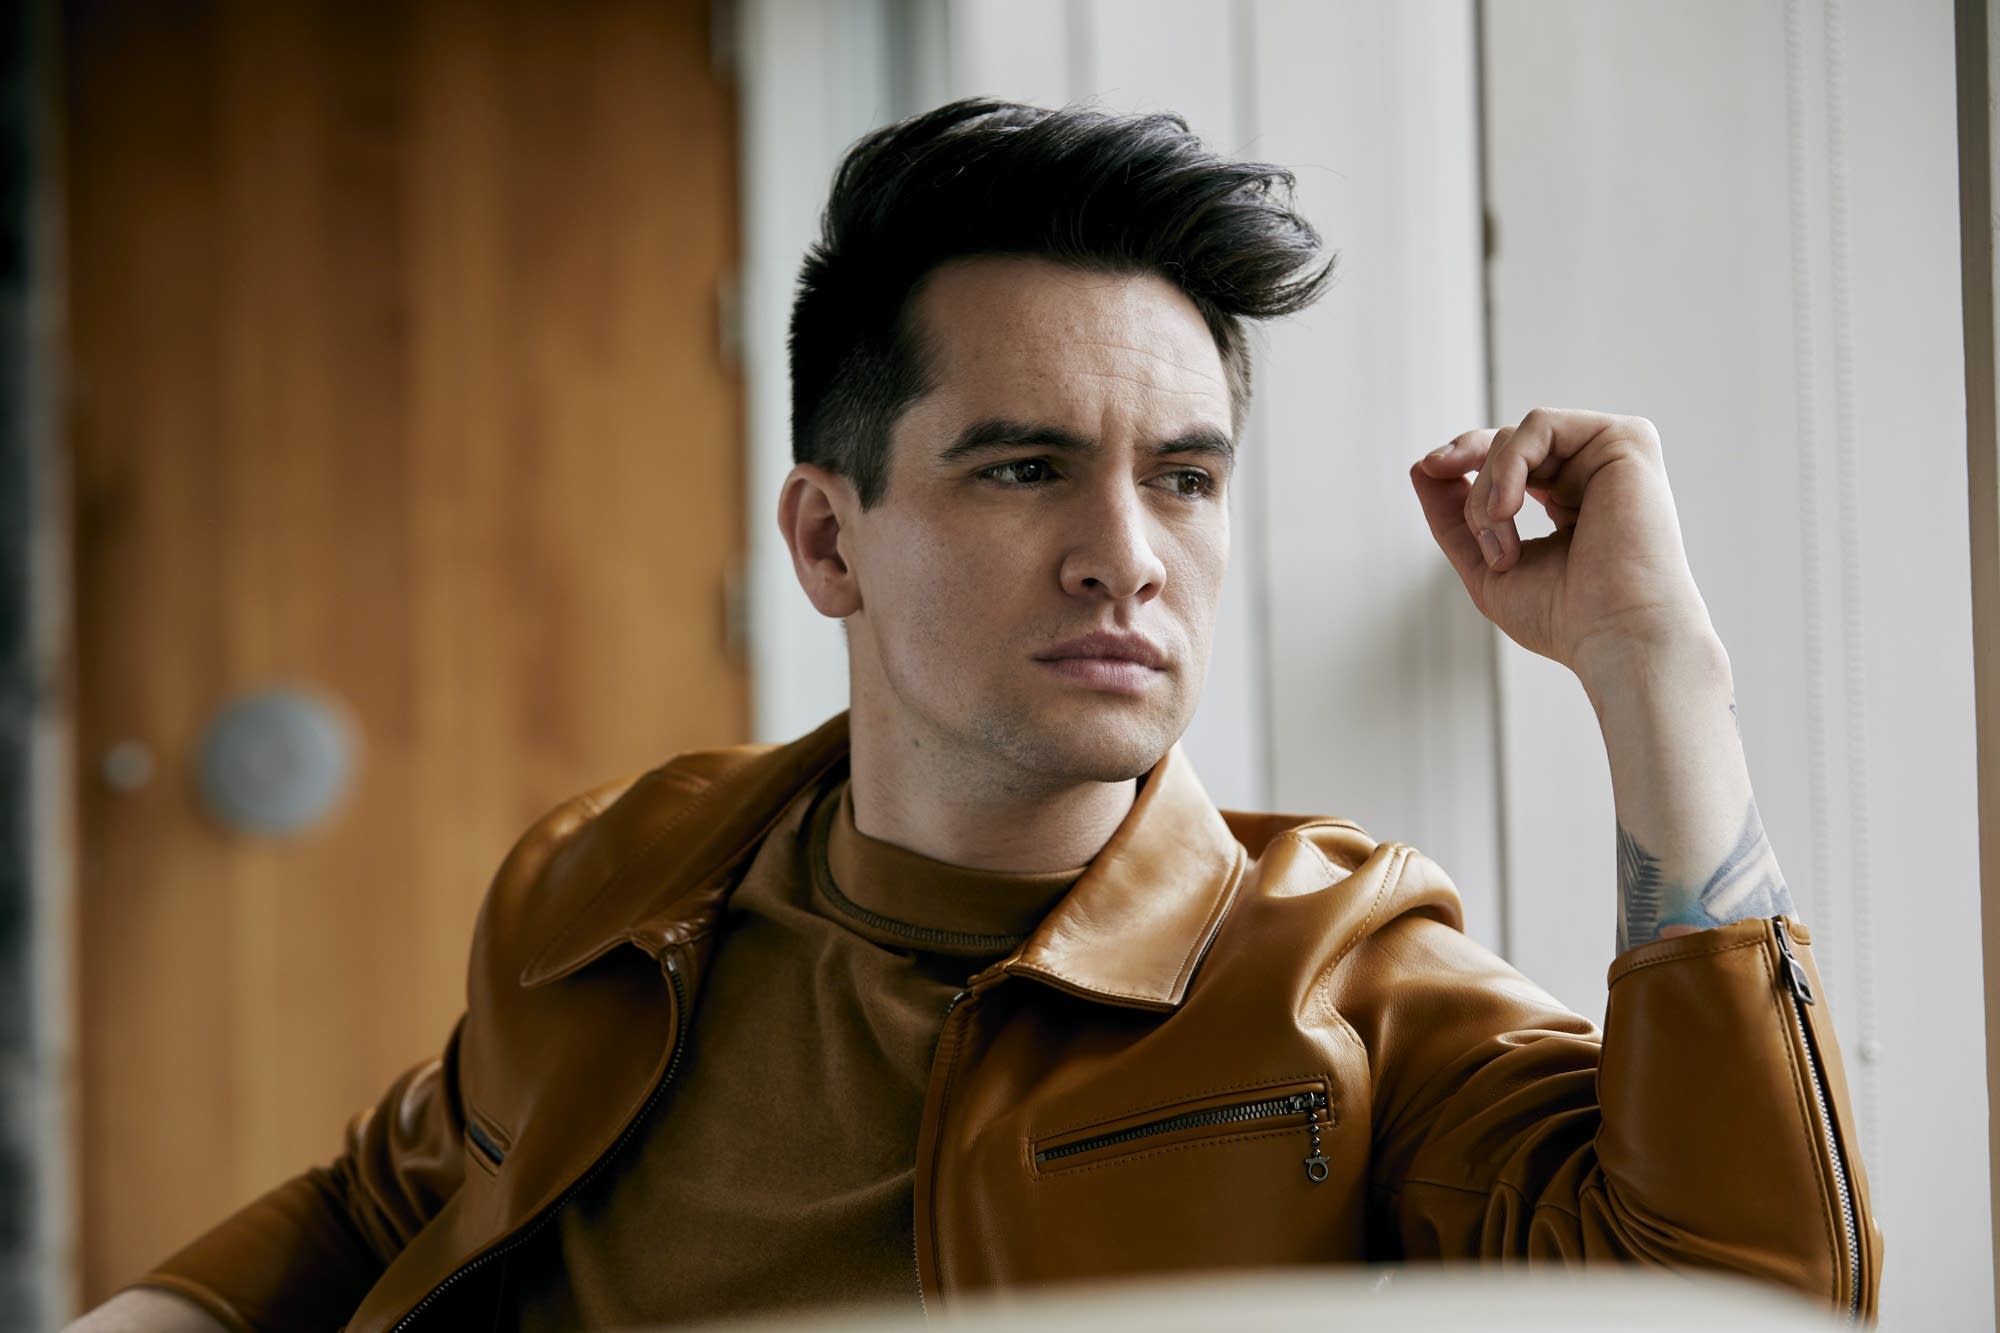 A photo of Brendon Urie, lead signer and front person of Panic! At The Disco